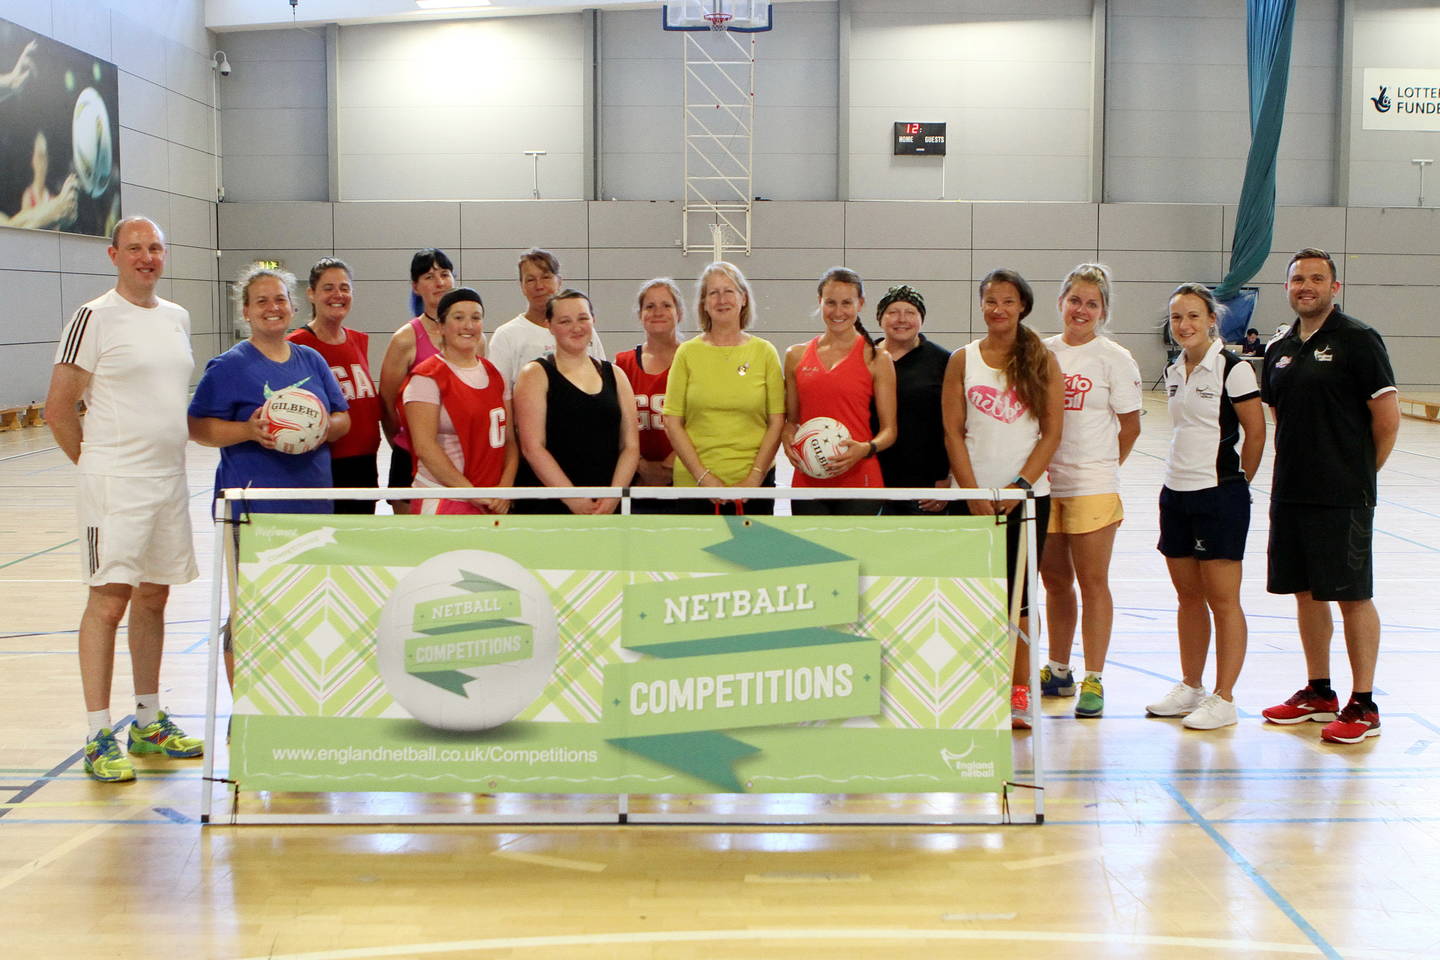 Group photo of players at netball training day